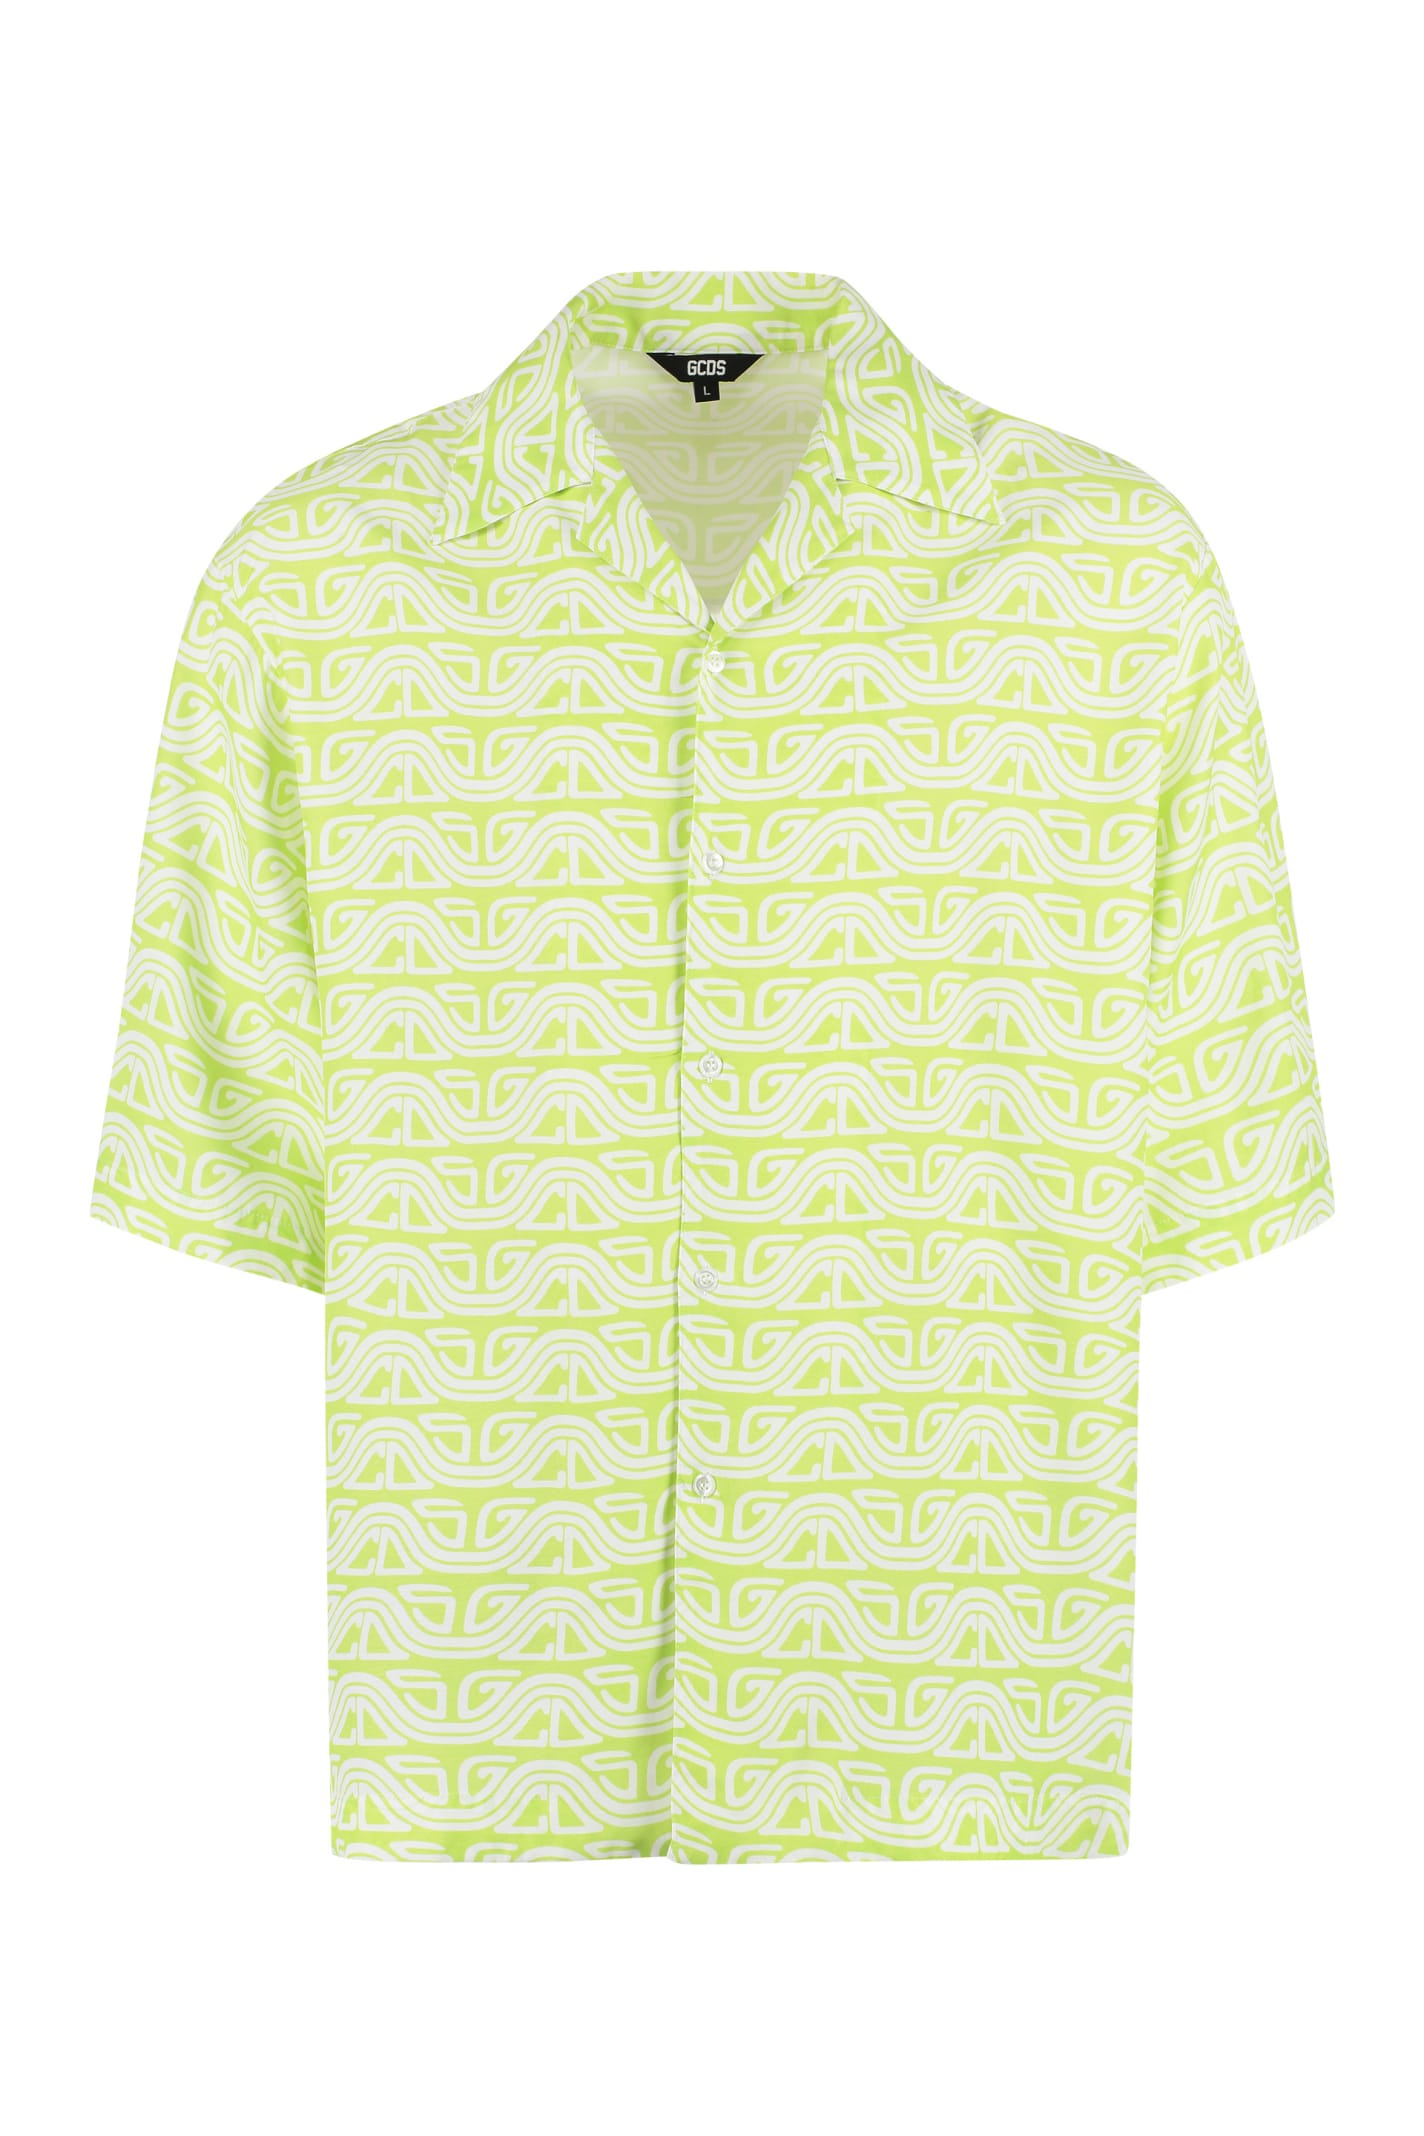 Shop Gcds Printed Short Sleeved Shirt In Multicolor